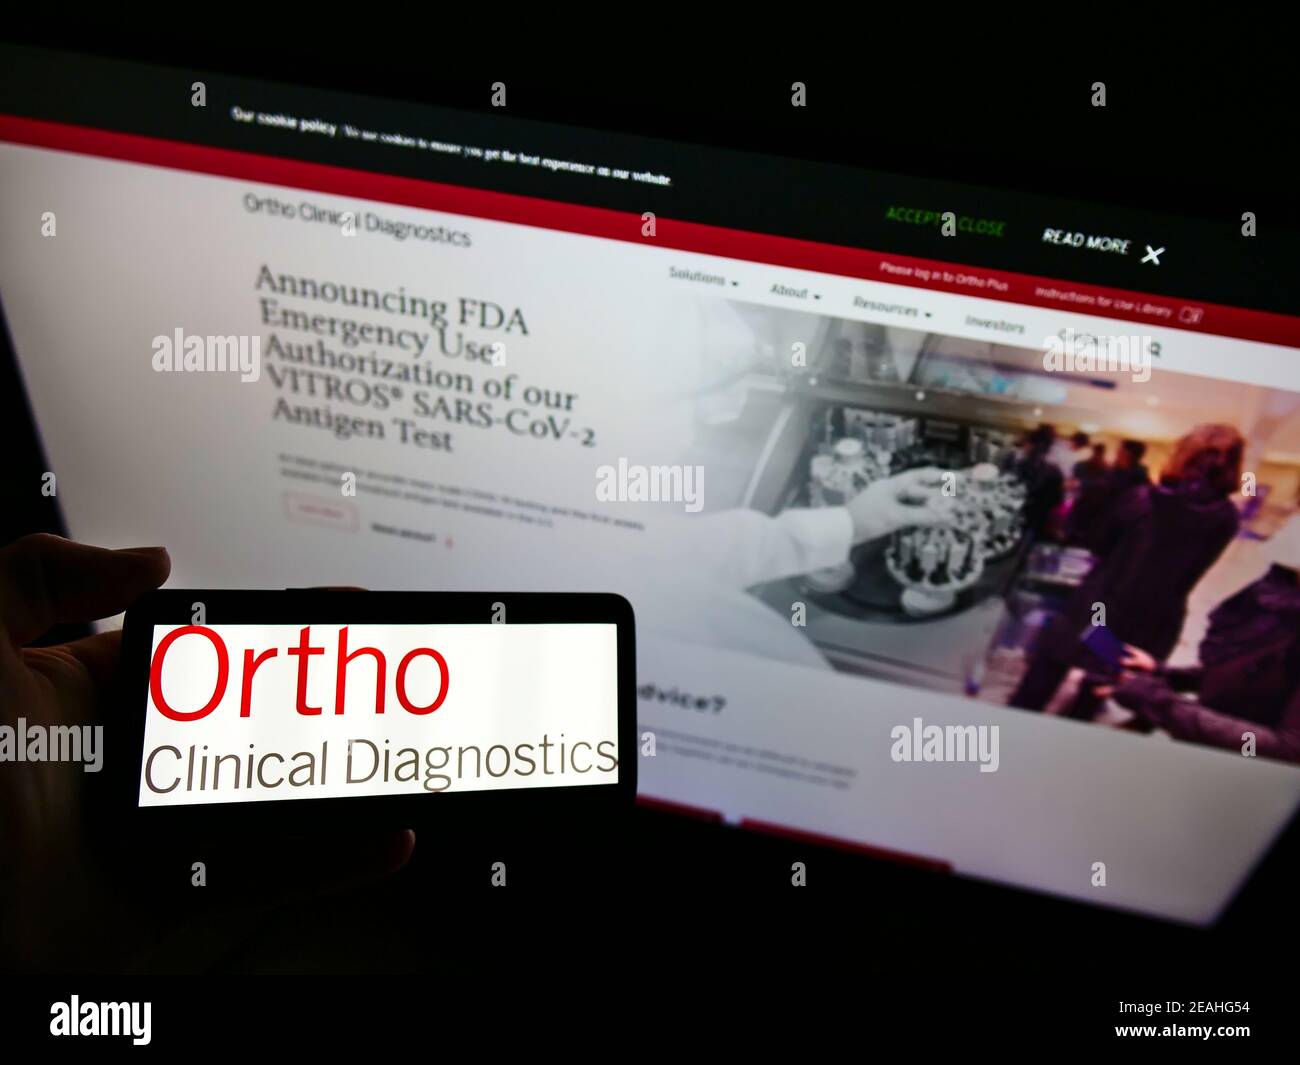 Person holding smartphone with logo of American company Ortho Clinical Diagnostics on screen in front of website. Focus on phone display. Stock Photo